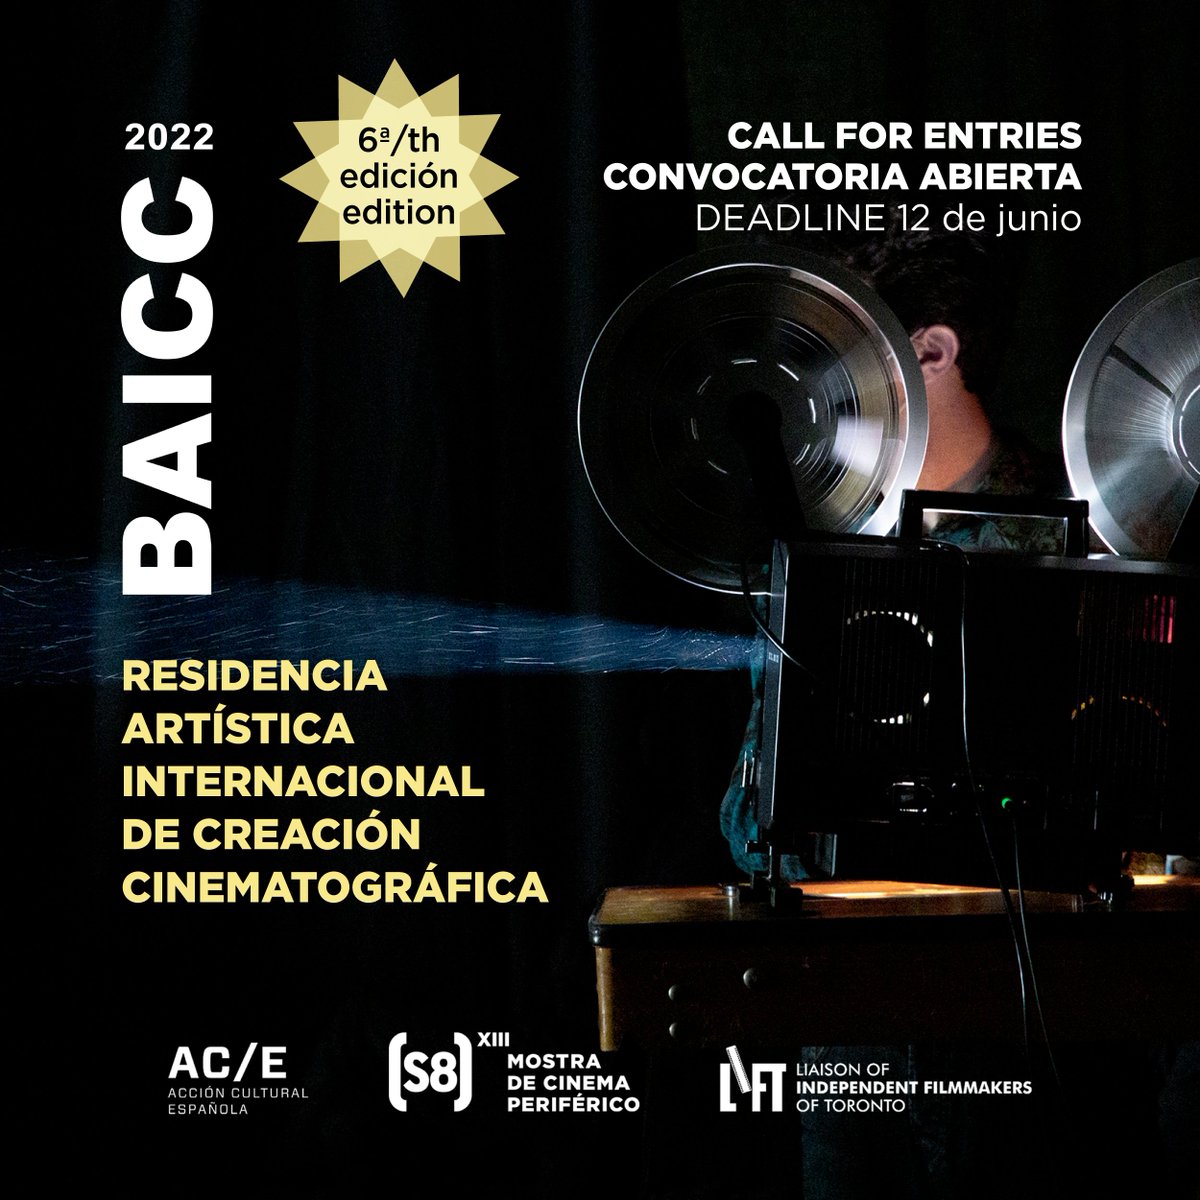 🚨🚨🚨Open call for BAICC - #ArtisticResidencies in #Film #Creation, in collaboration with the @LIFTfilm and @ACEcultura! Check the terms and conditions on our website:
cutt.ly/wHfLG9m
DL: June 12th